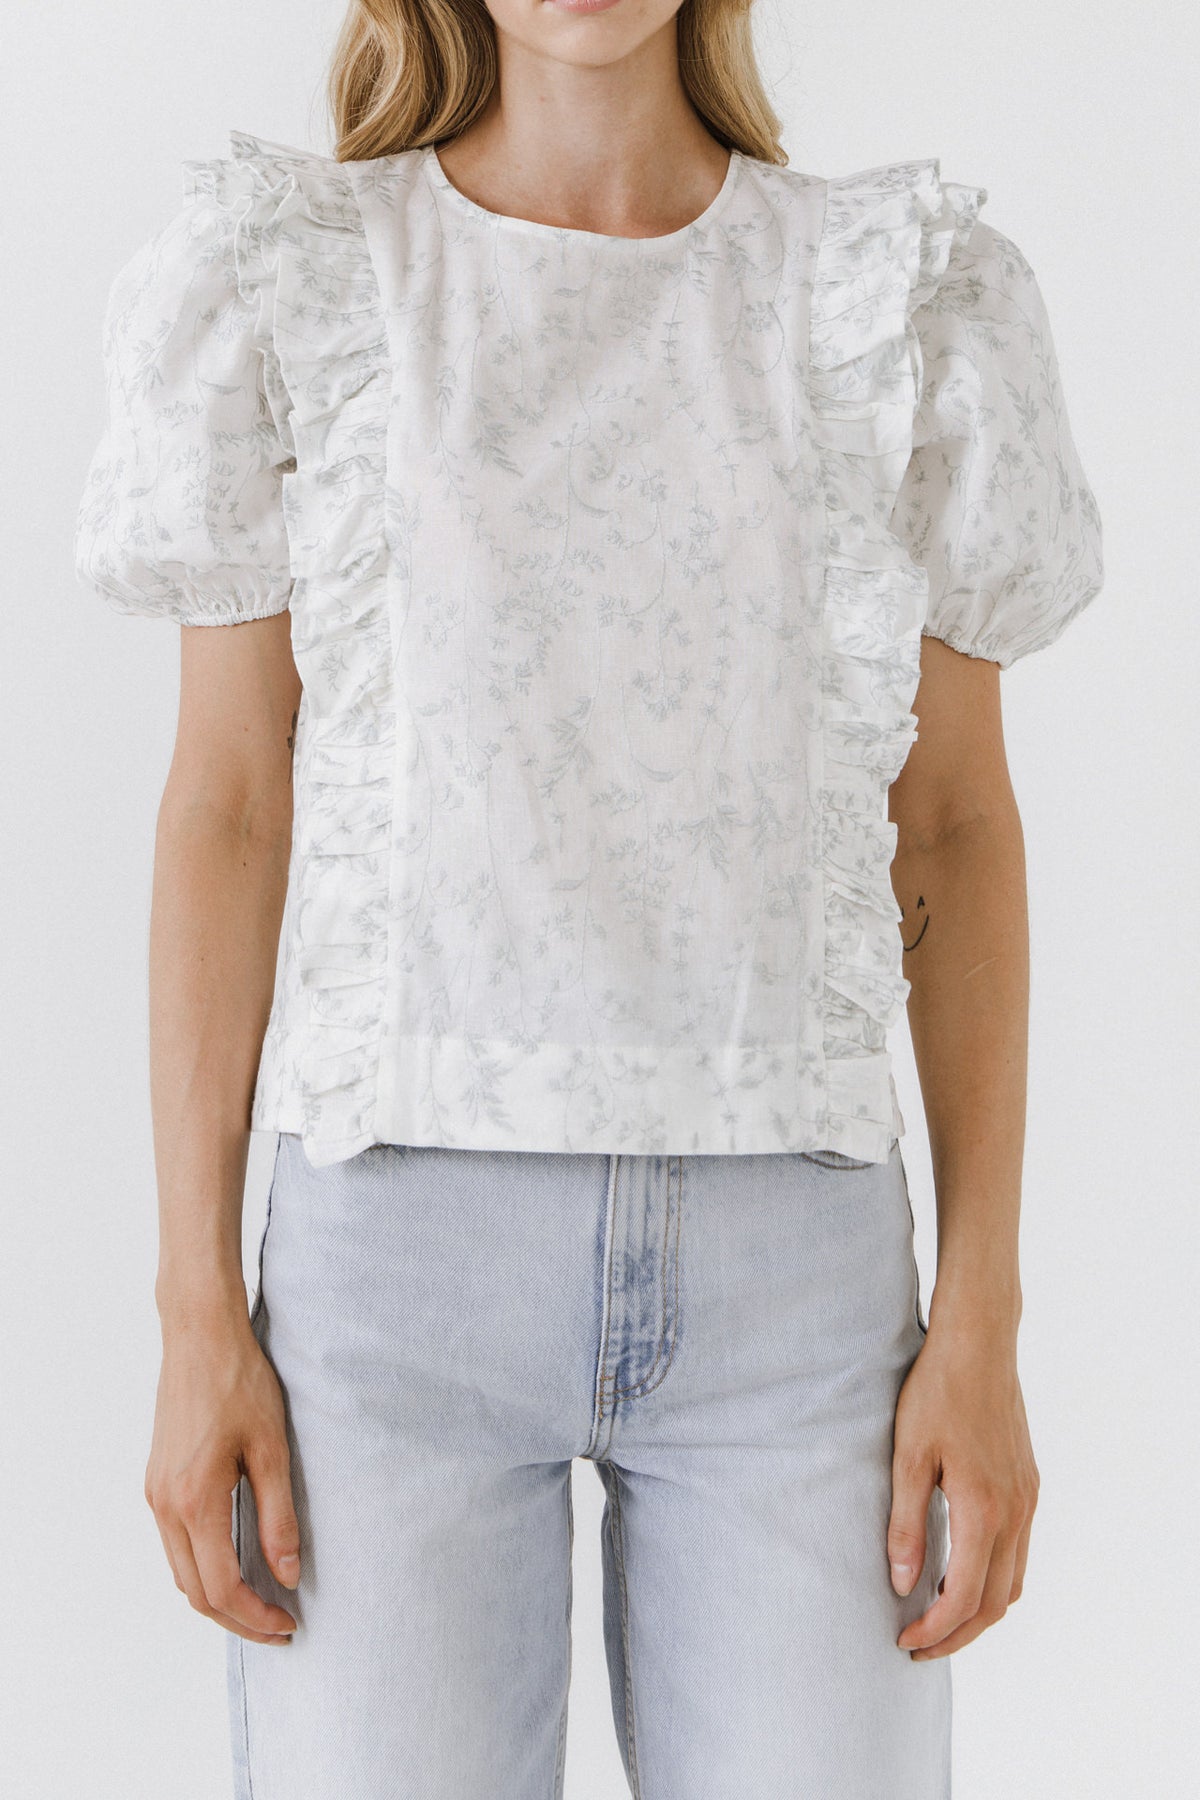 FREE THE ROSES - Ruffle Detail Top with Short Puff Sleeves - TOPS available at Objectrare